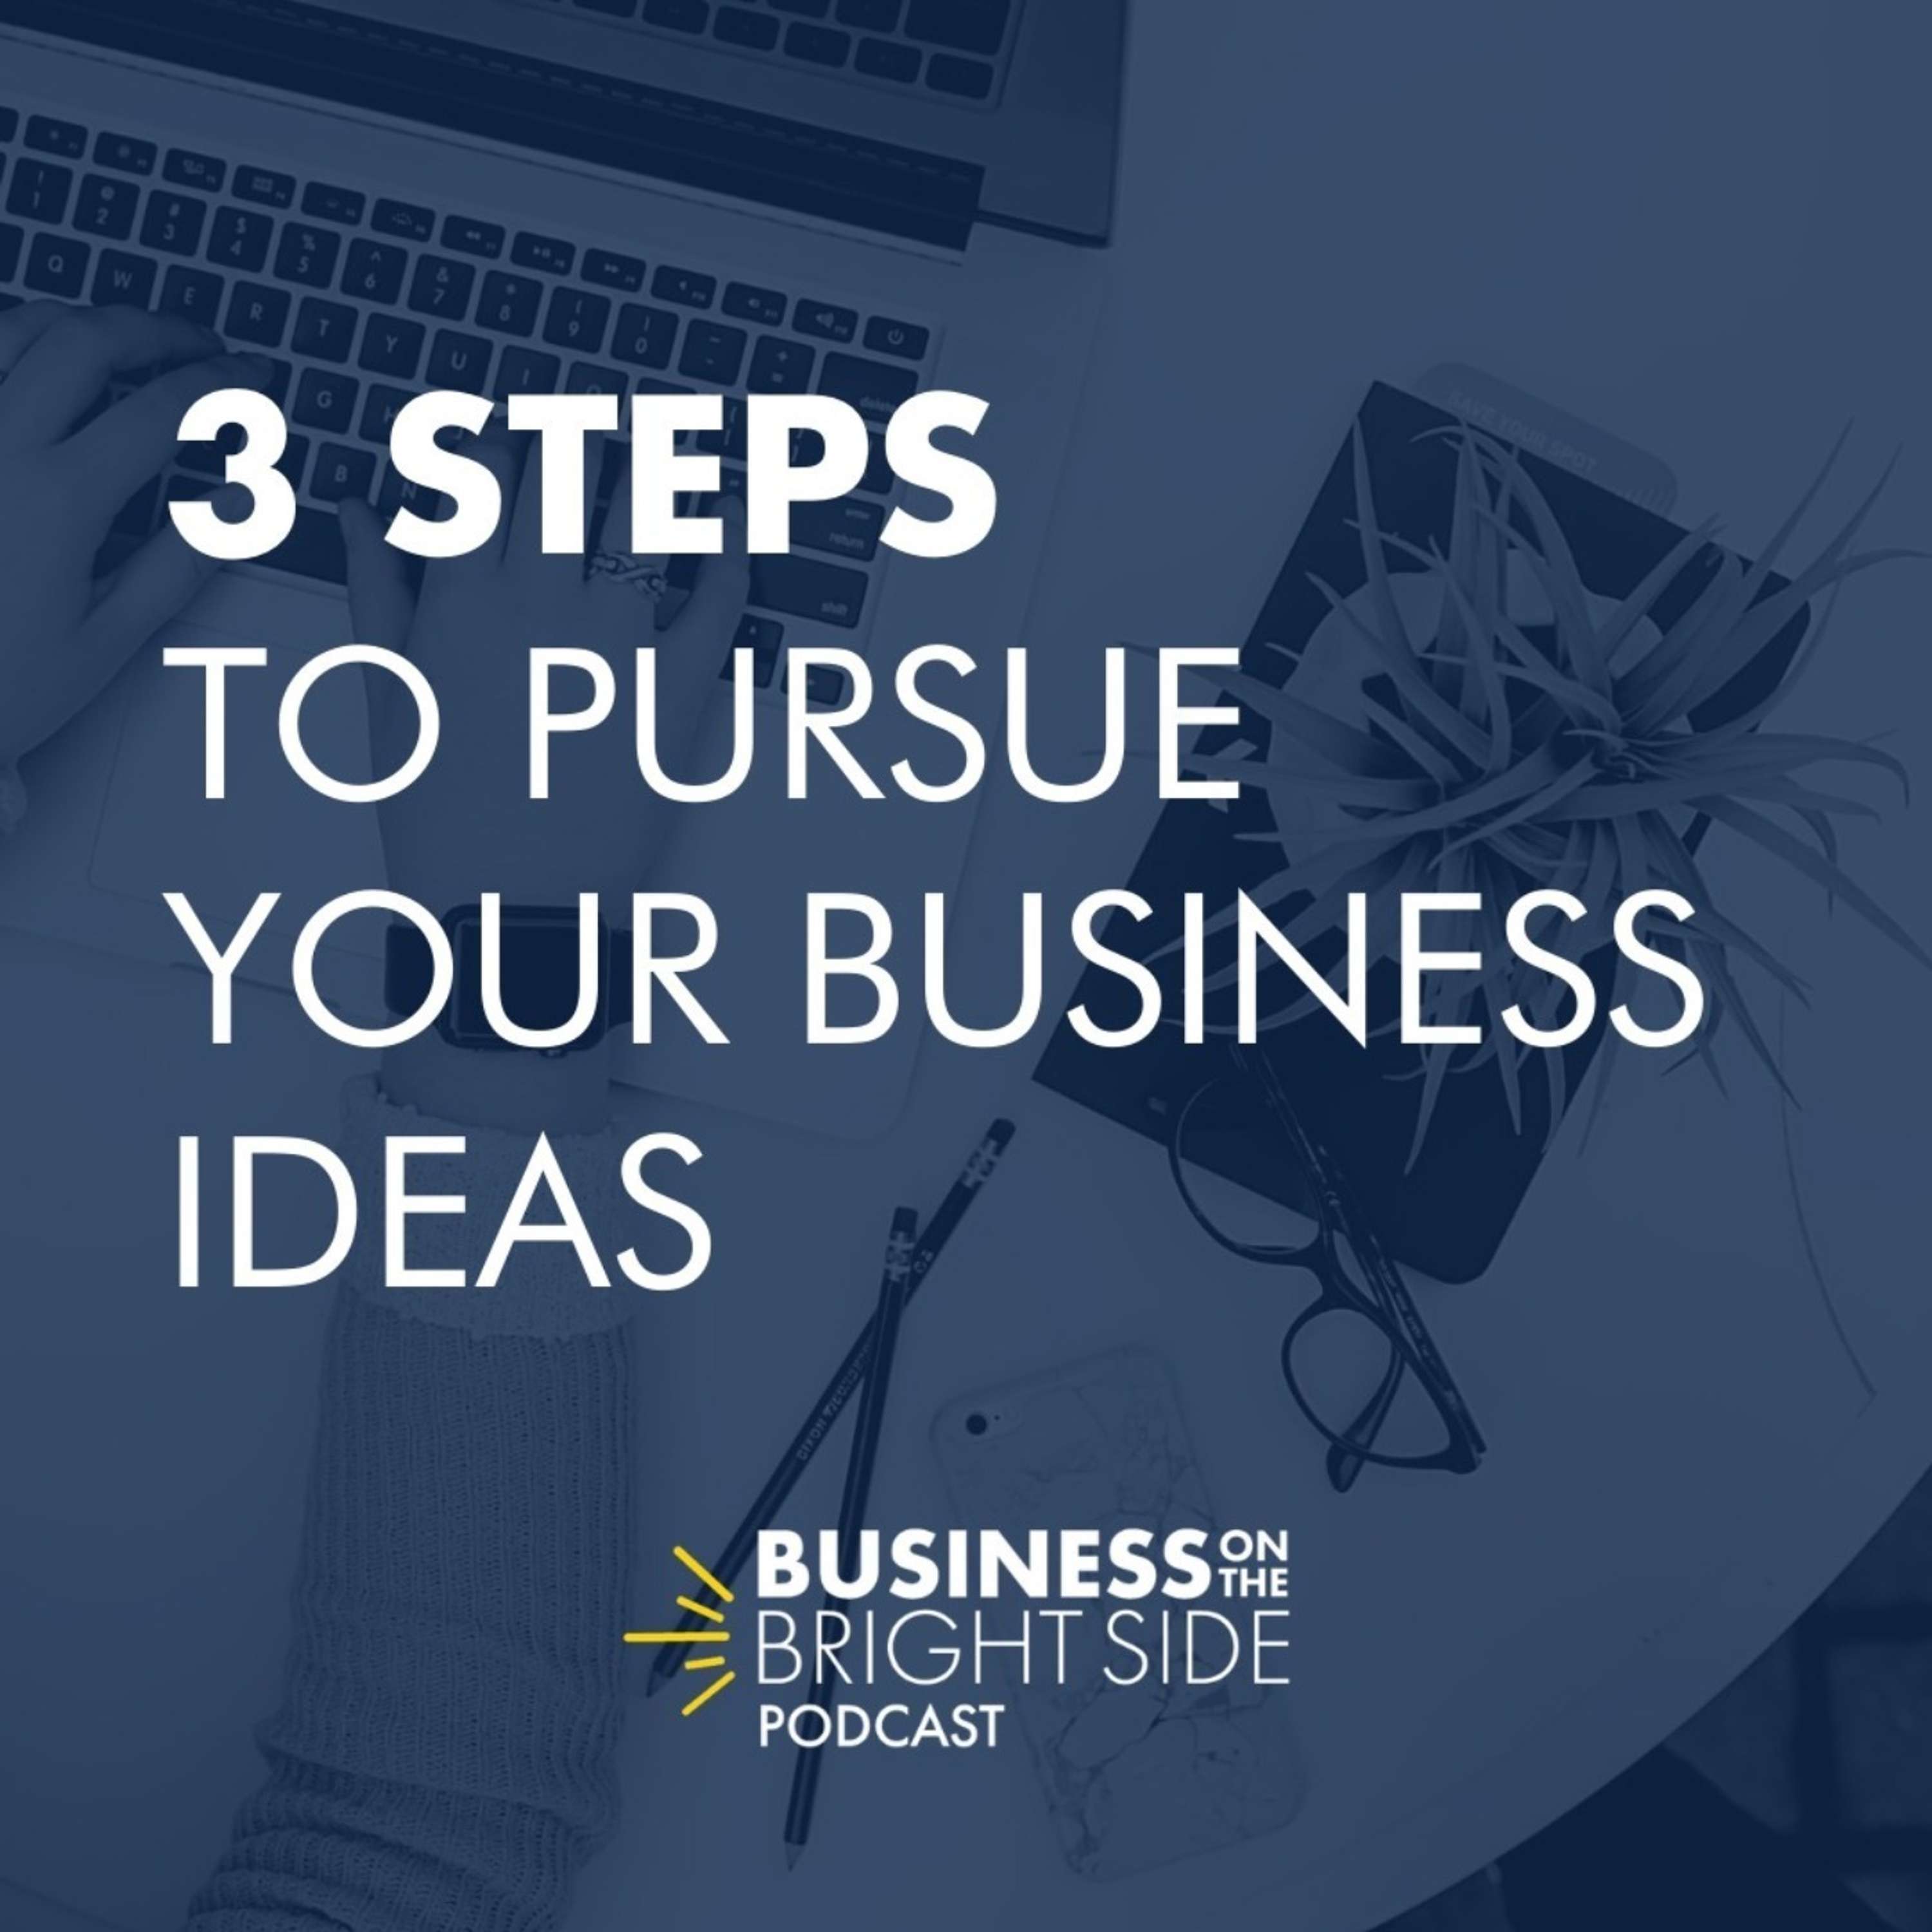 1: 3 Steps to Pursue Your Business Ideas